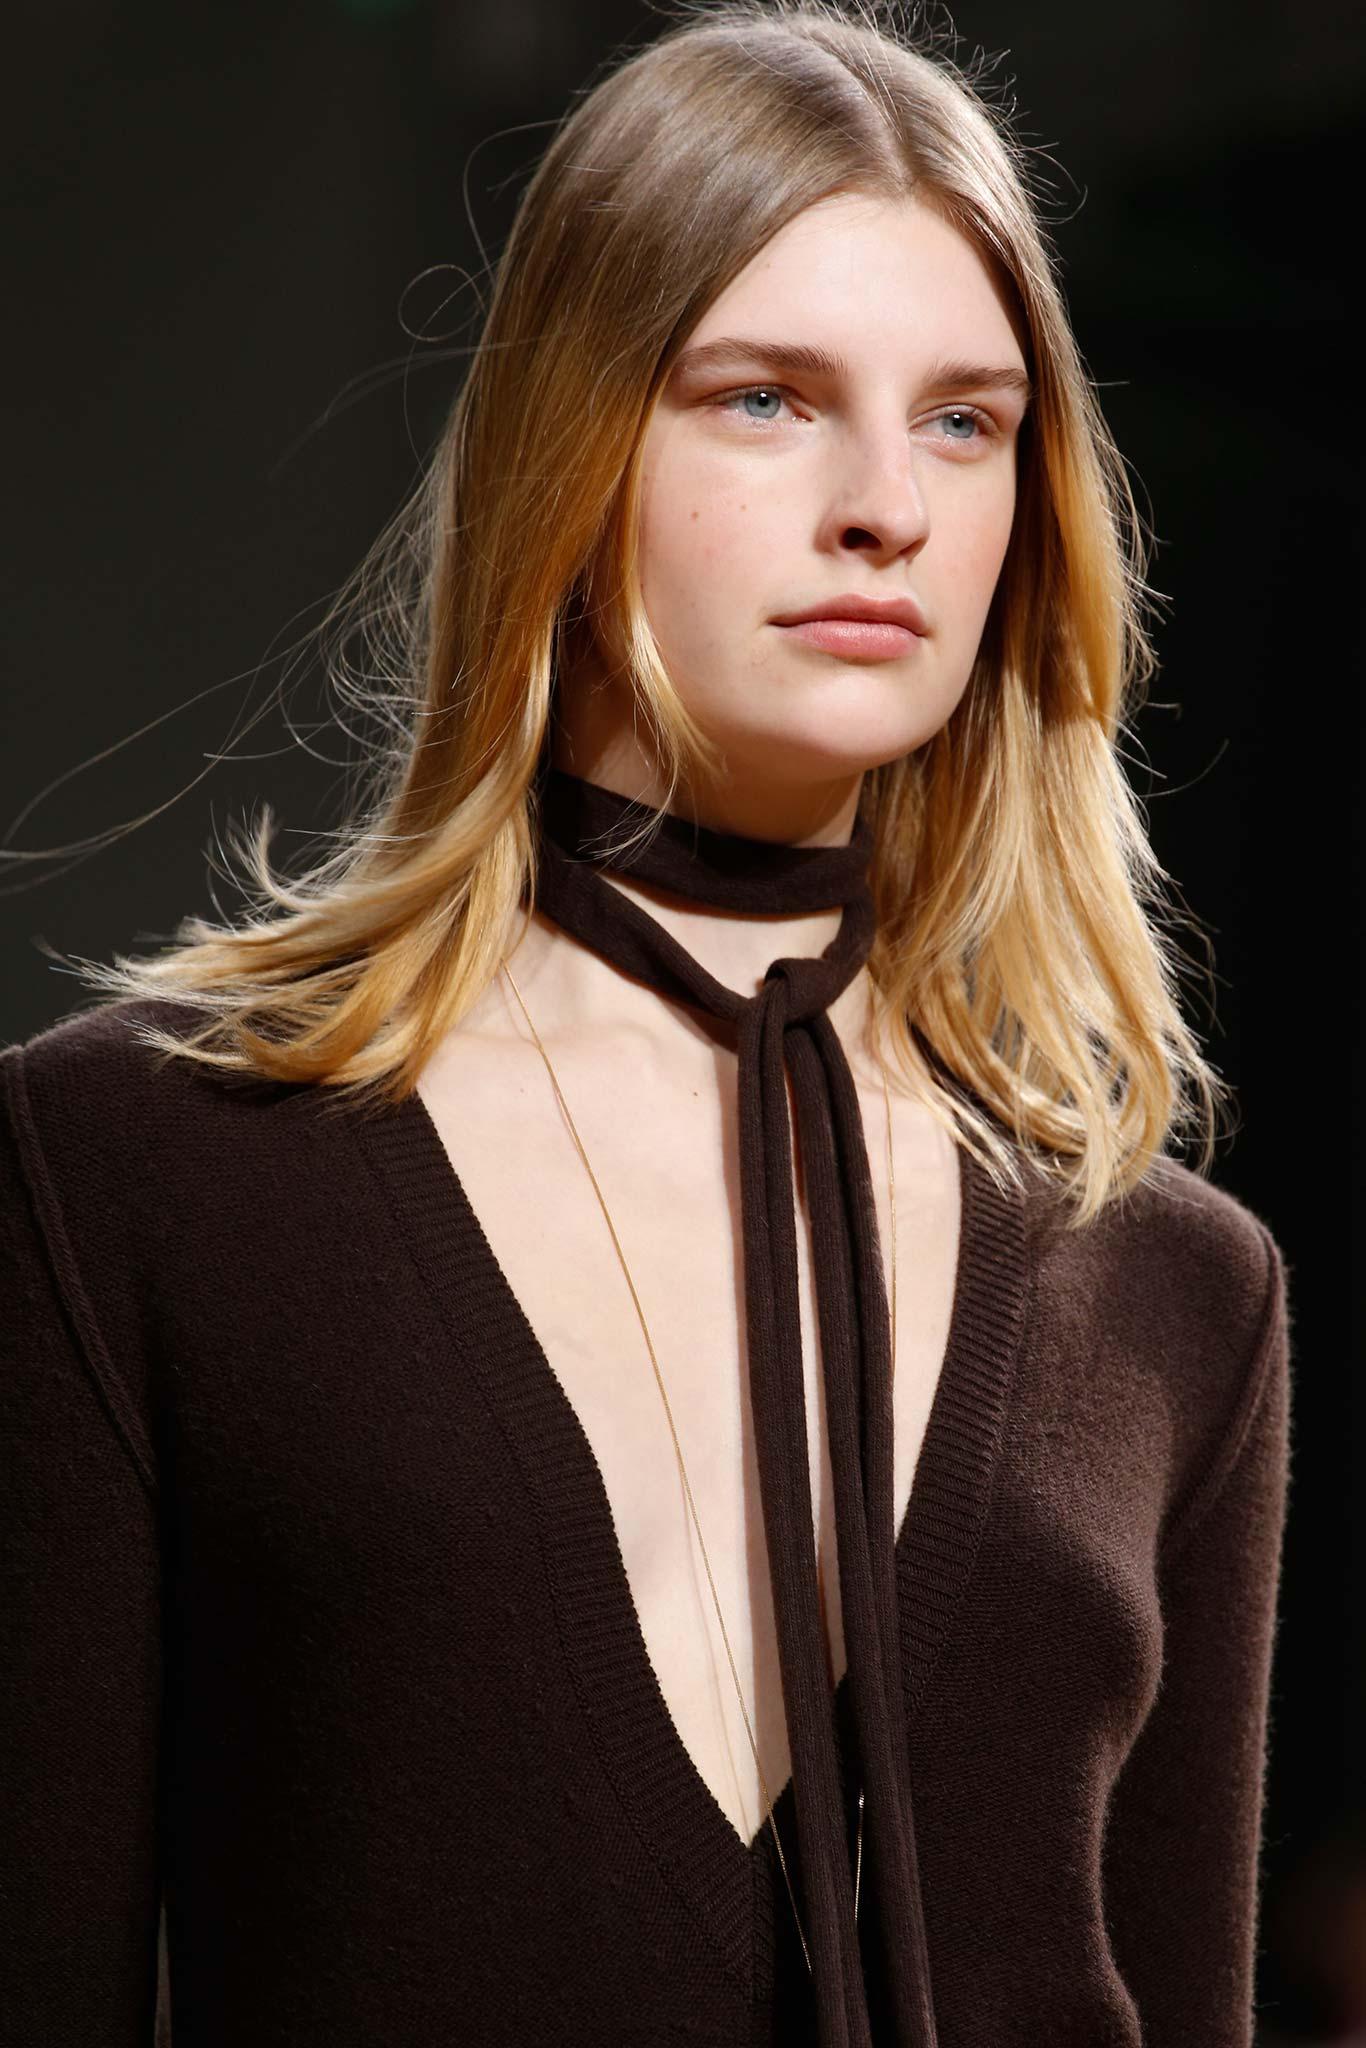 Chloé FALL 2015 RTW runway wool cashmere dress Clare Waight Keller READY-TO-WEAR
Chloe by Clare Waight Keller
Model: Eva Palionite showed this beautiful dress in the look of 13.
Collection: FALL 2015 READY-TO-WEAR
Country of production: Italy
Chloé